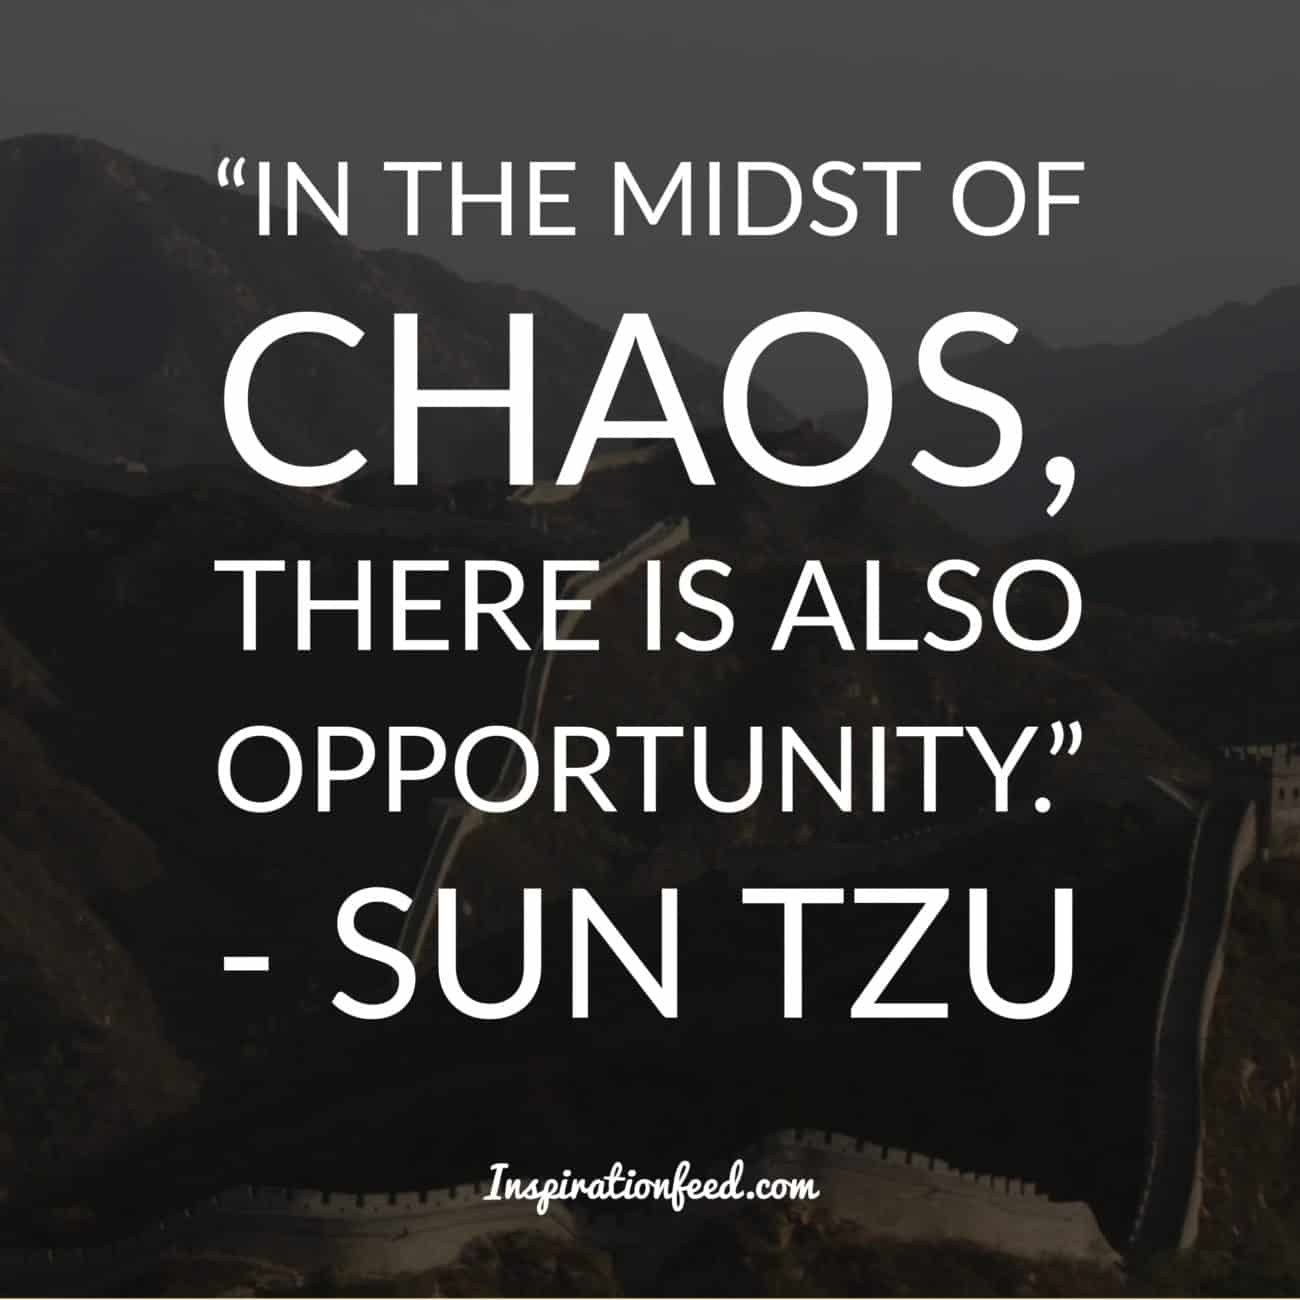 30 Powerful Sun Tzu Quotes About The Art Of War | Inspirationfeed